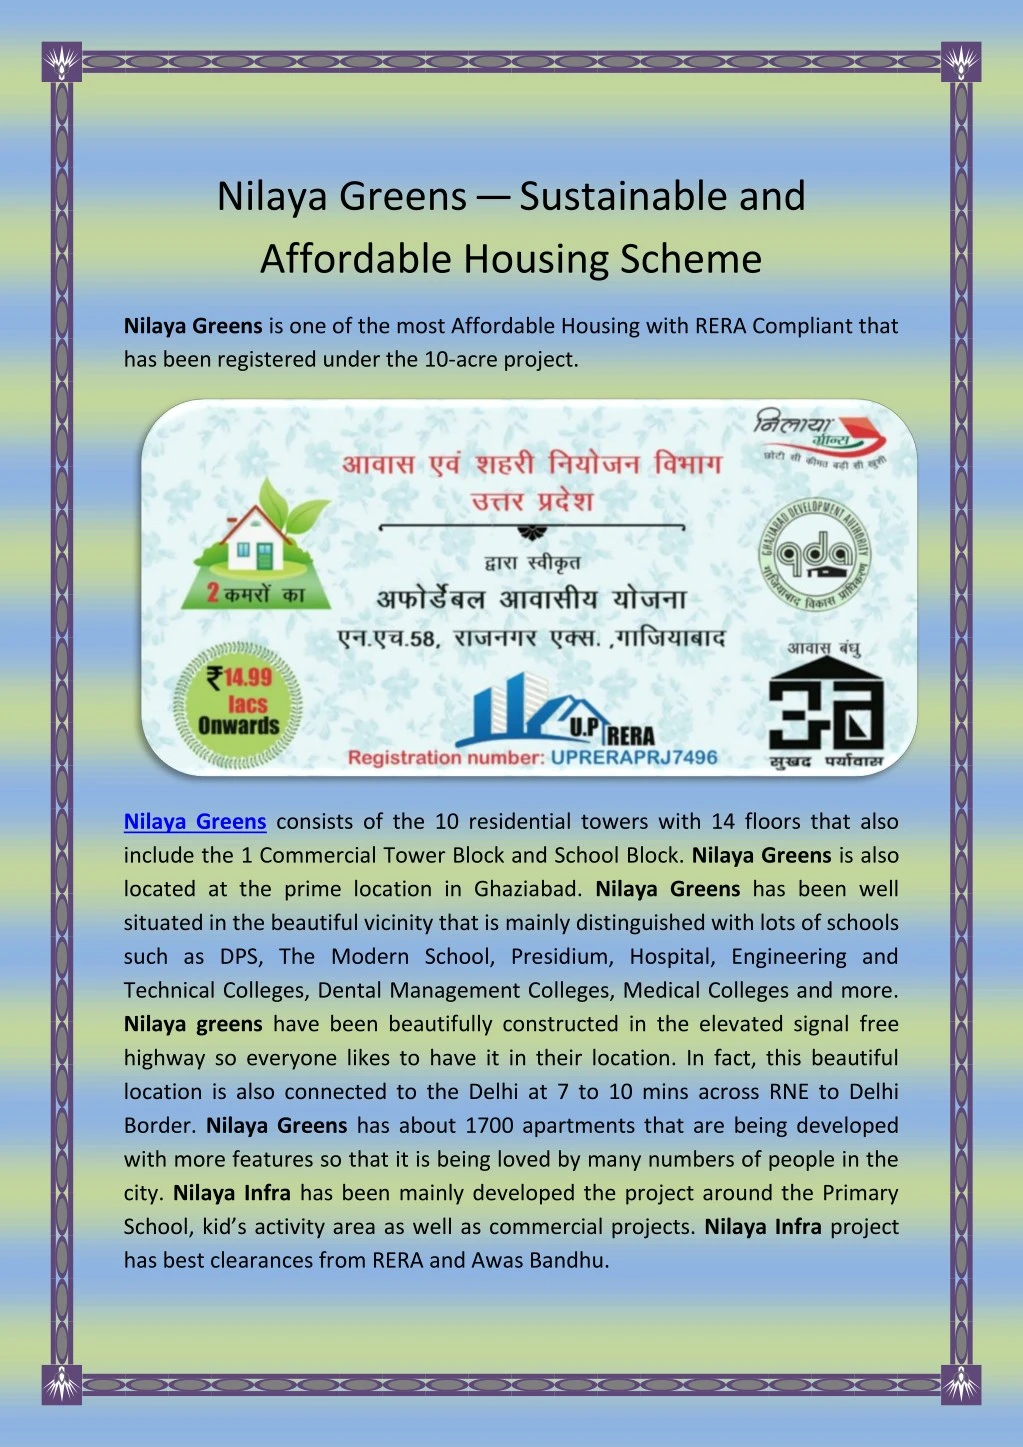 nilaya greens sustainable and affordable housing